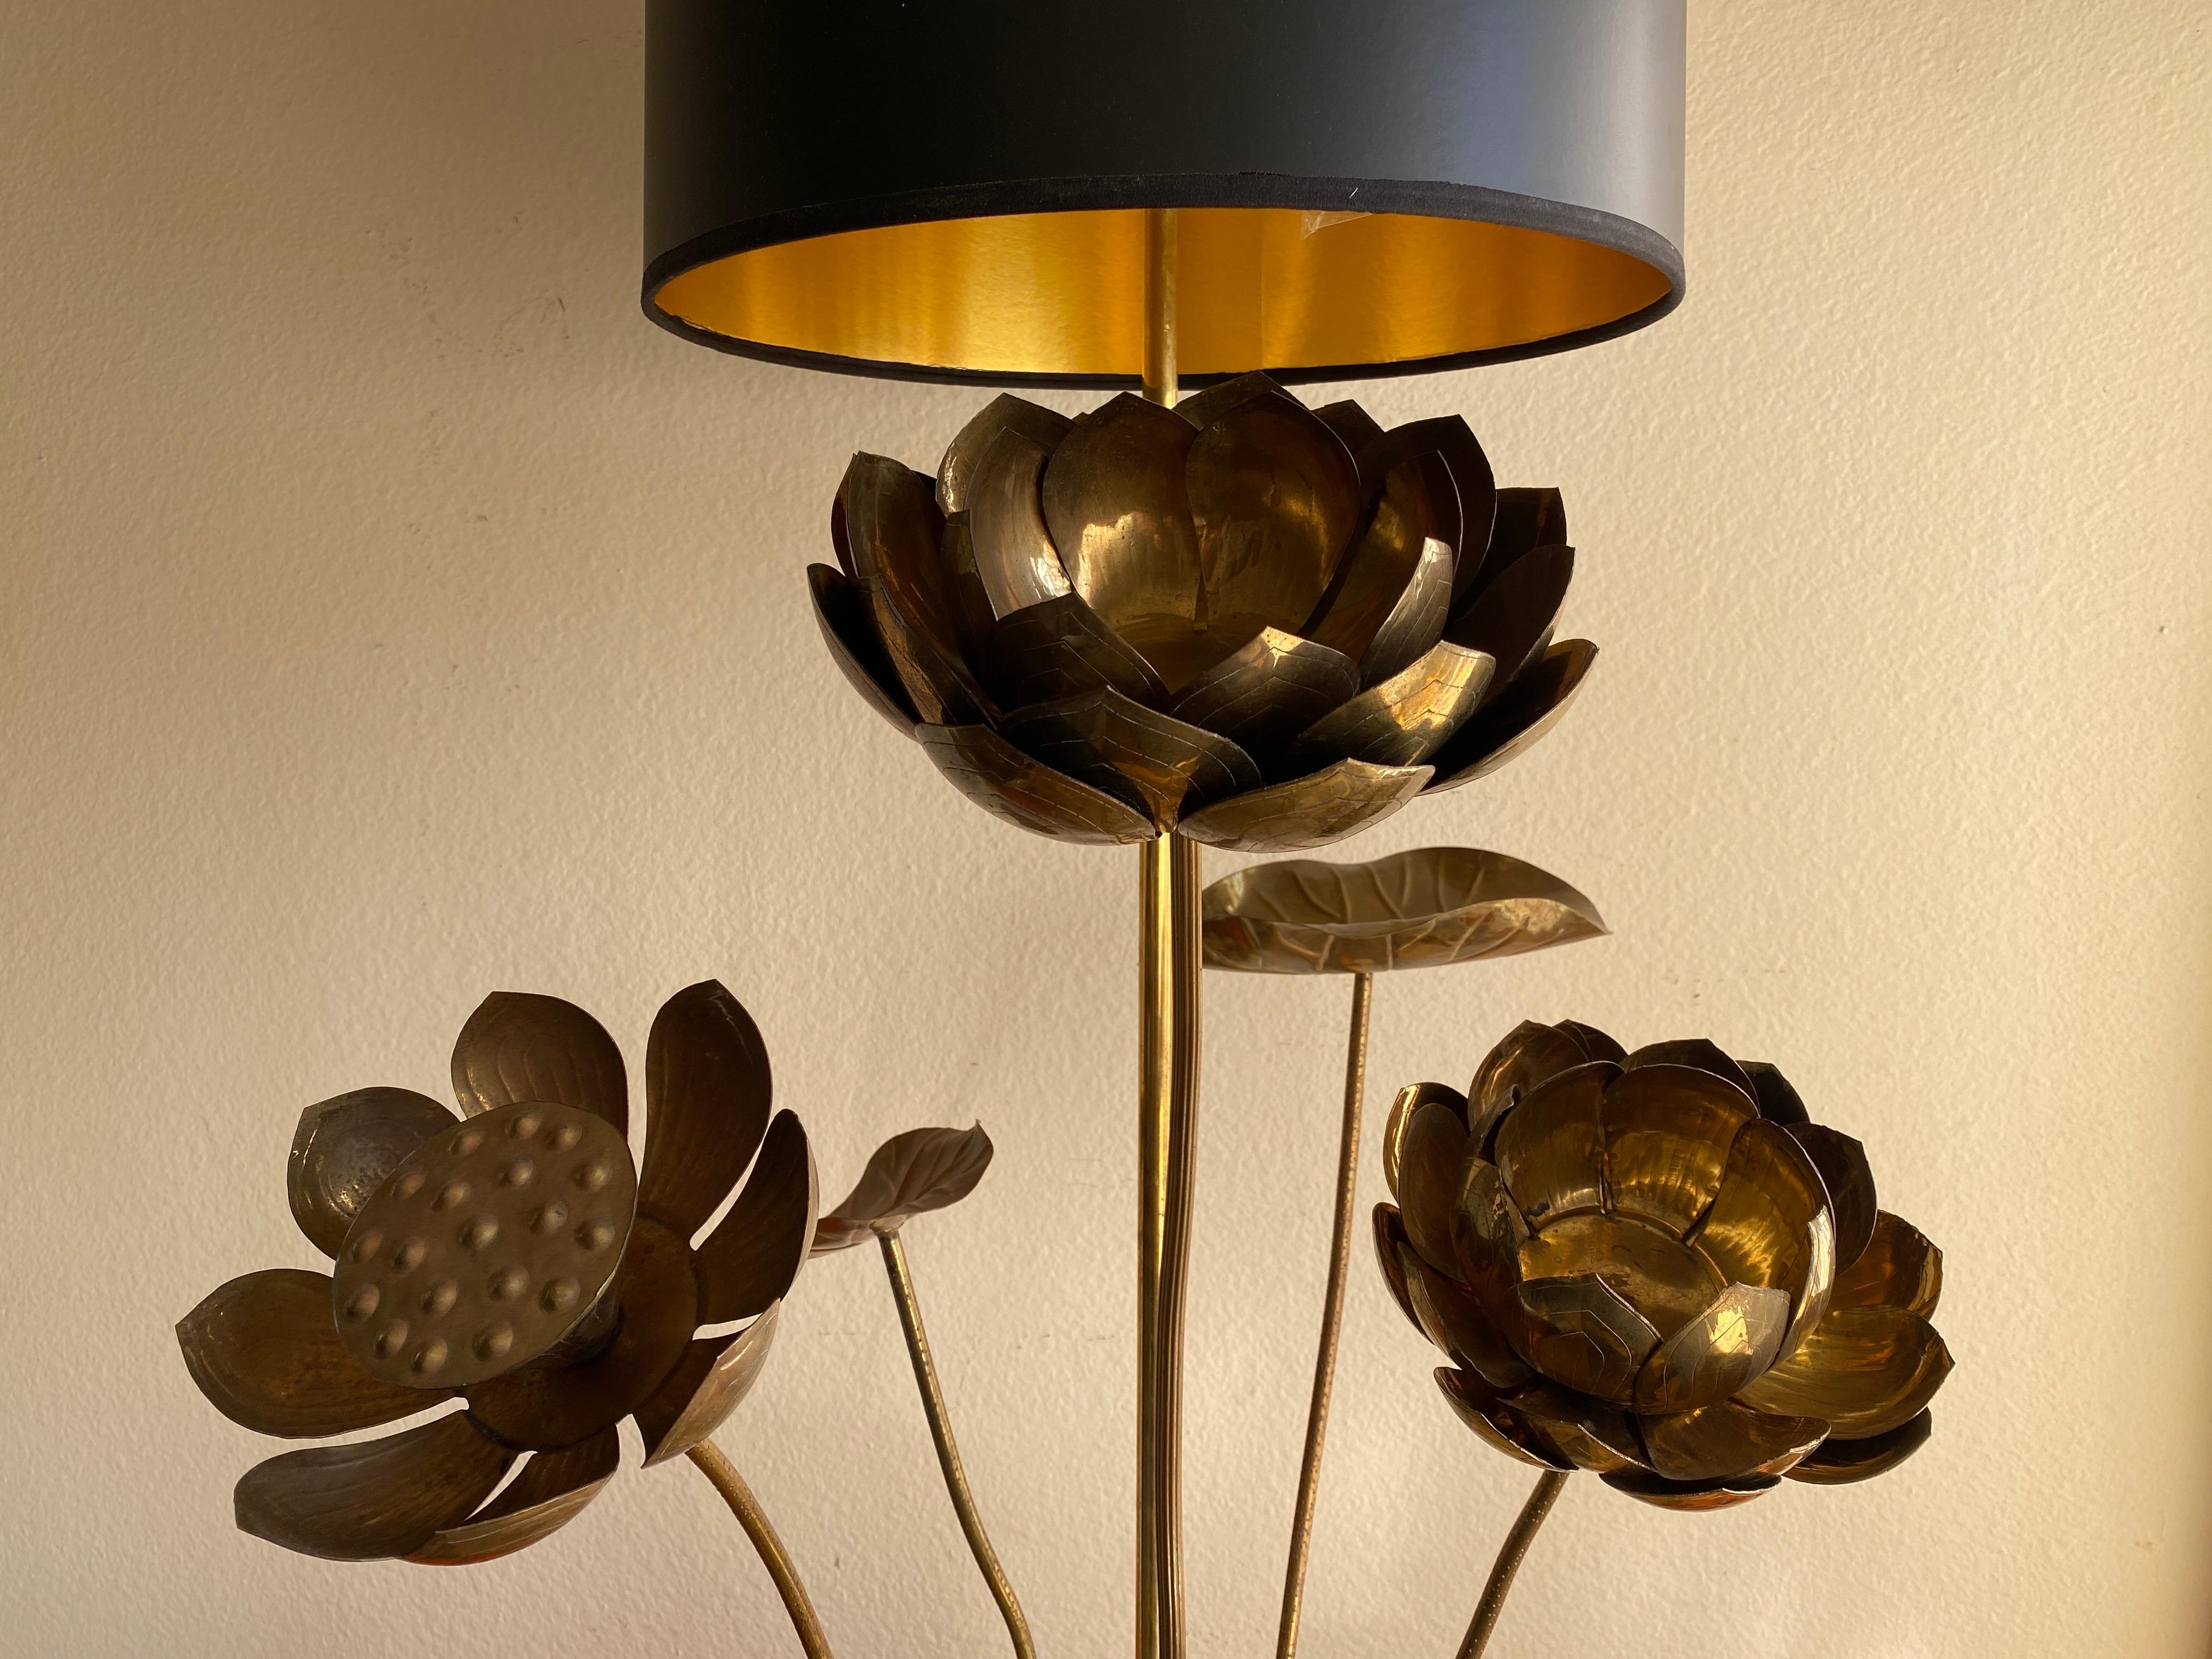 Brass lotus flower pot lamp attributed to Feldman Lighting Co. Shade not included.